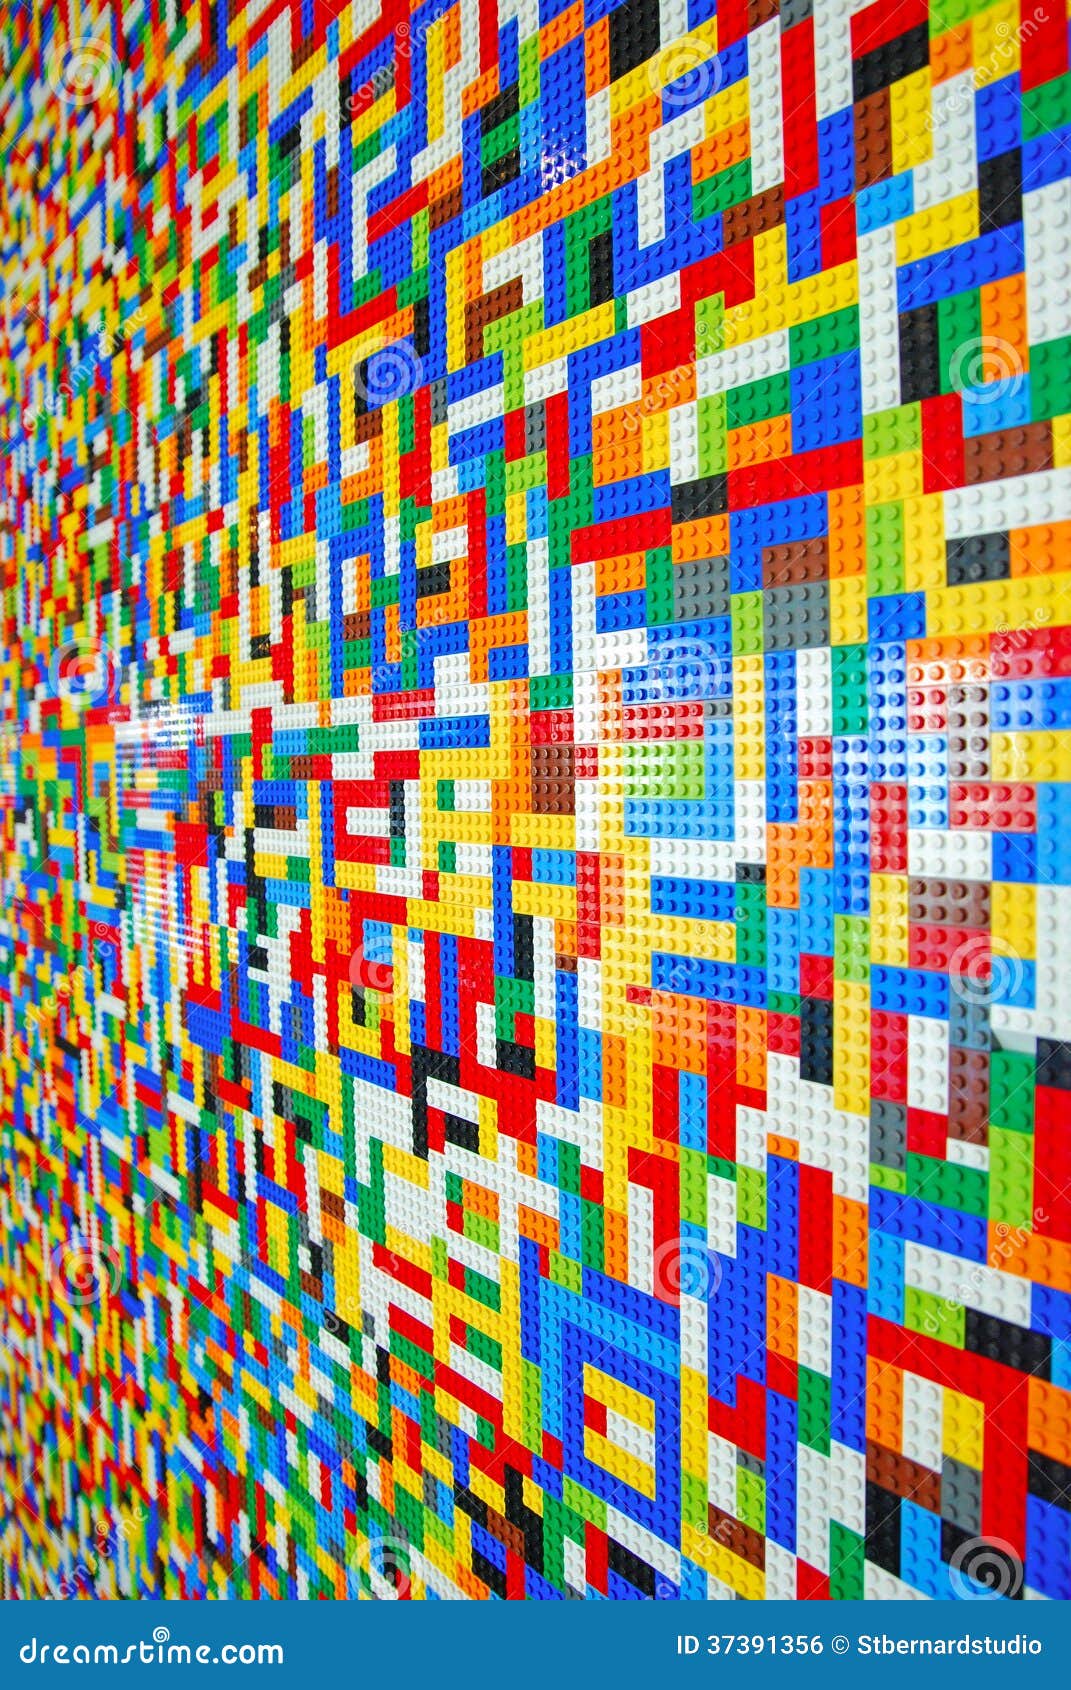 a wall full of lego pieces